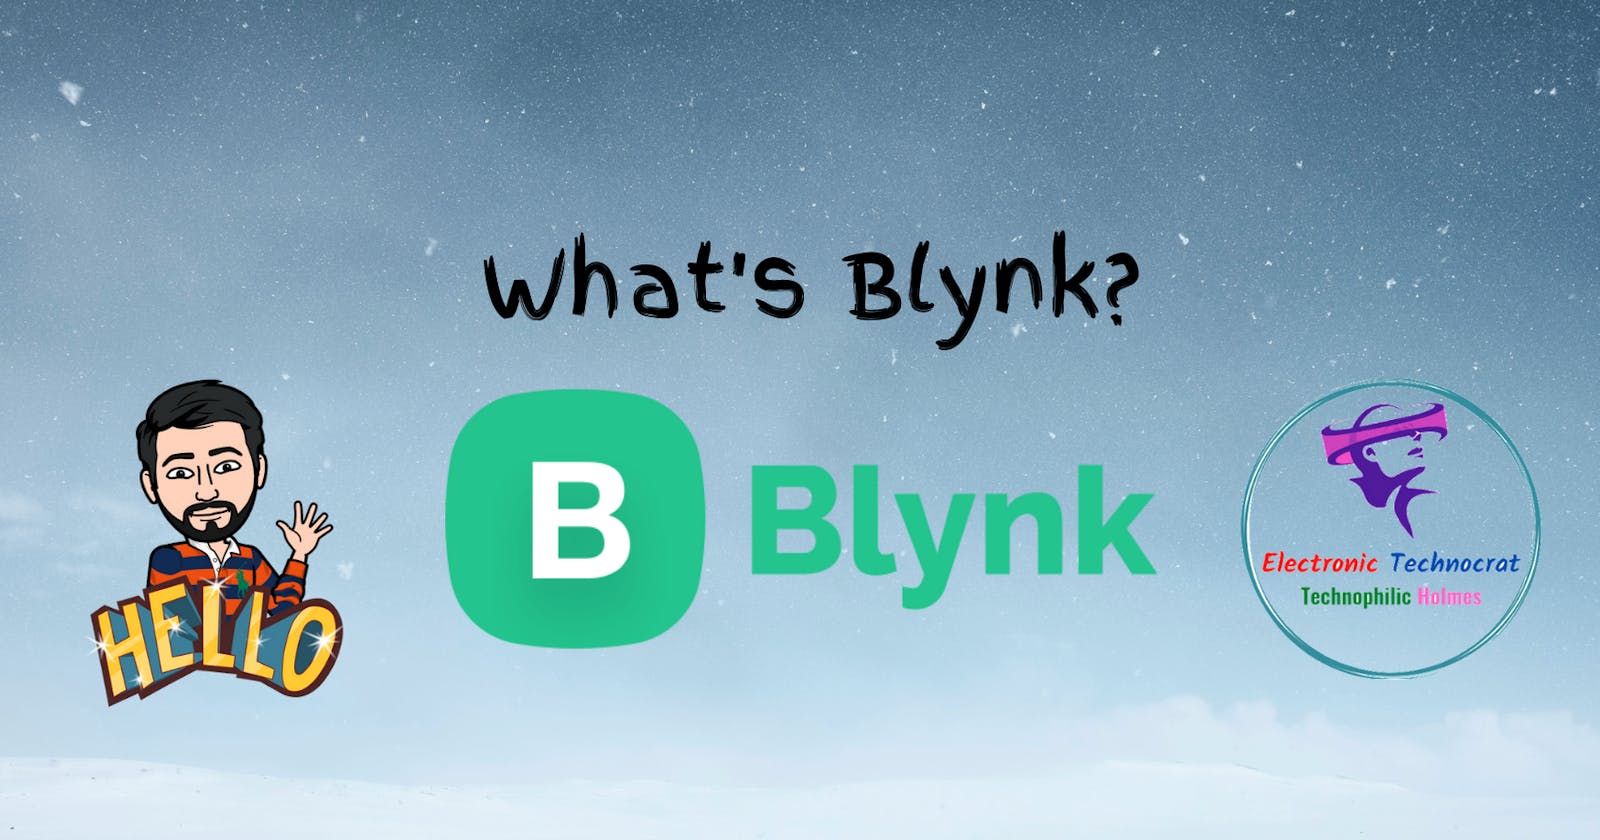 What's Blynk?